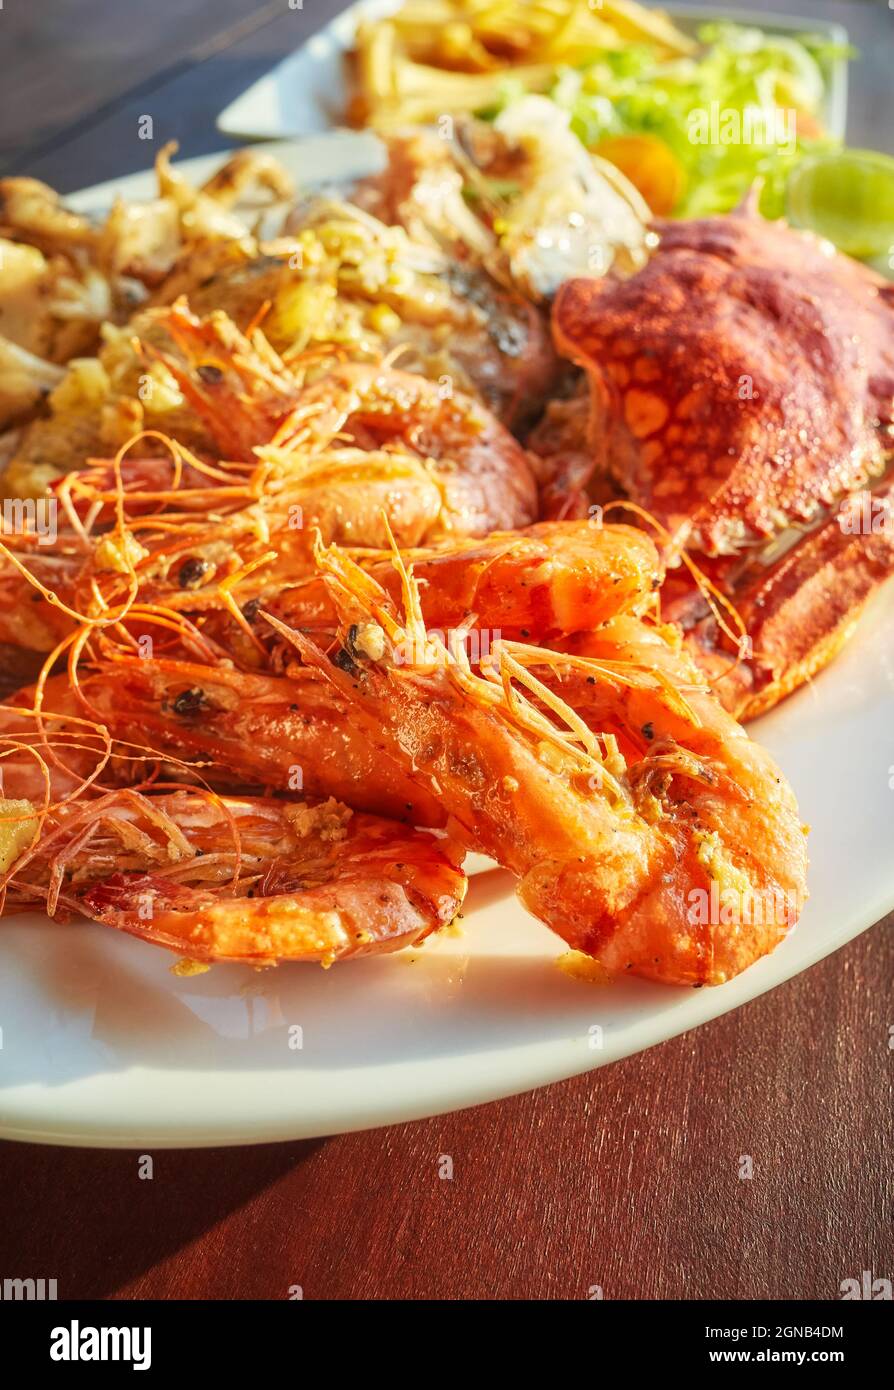 Grilled seafood platter with crab, fish and prawns in garlic sauce, selective focus. Stock Photo